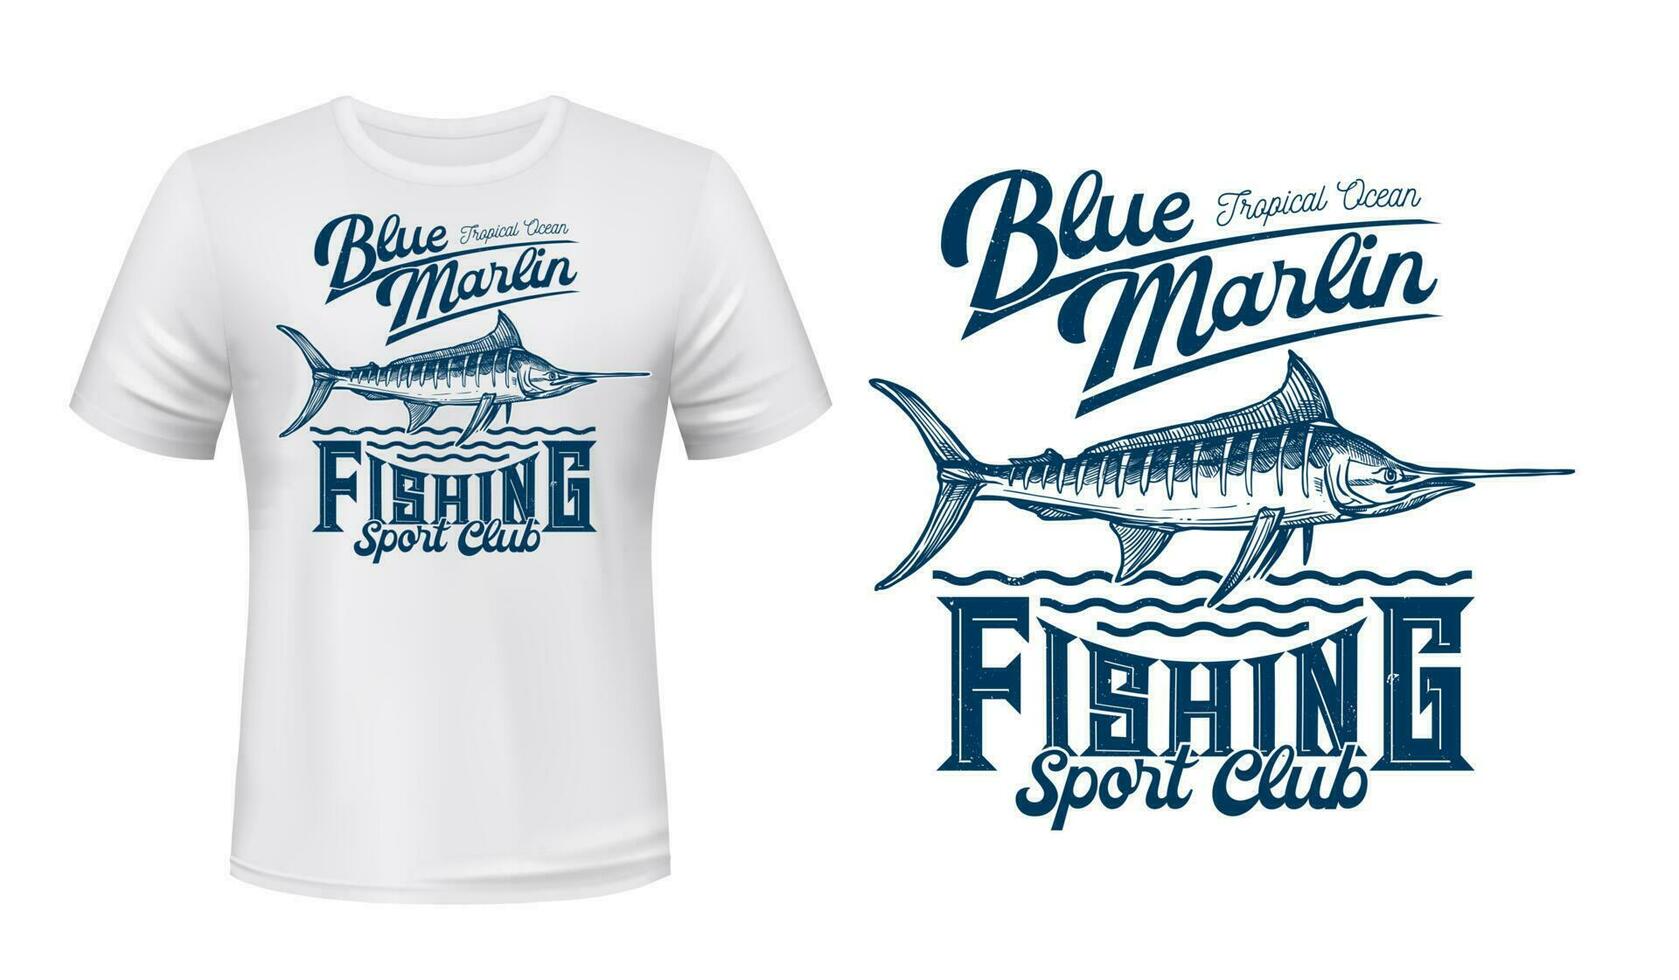 https://static.vecteezy.com/system/resources/previews/023/840/331/non_2x/sport-fishing-club-t-shirt-print-with-marlin-fish-vector.jpg